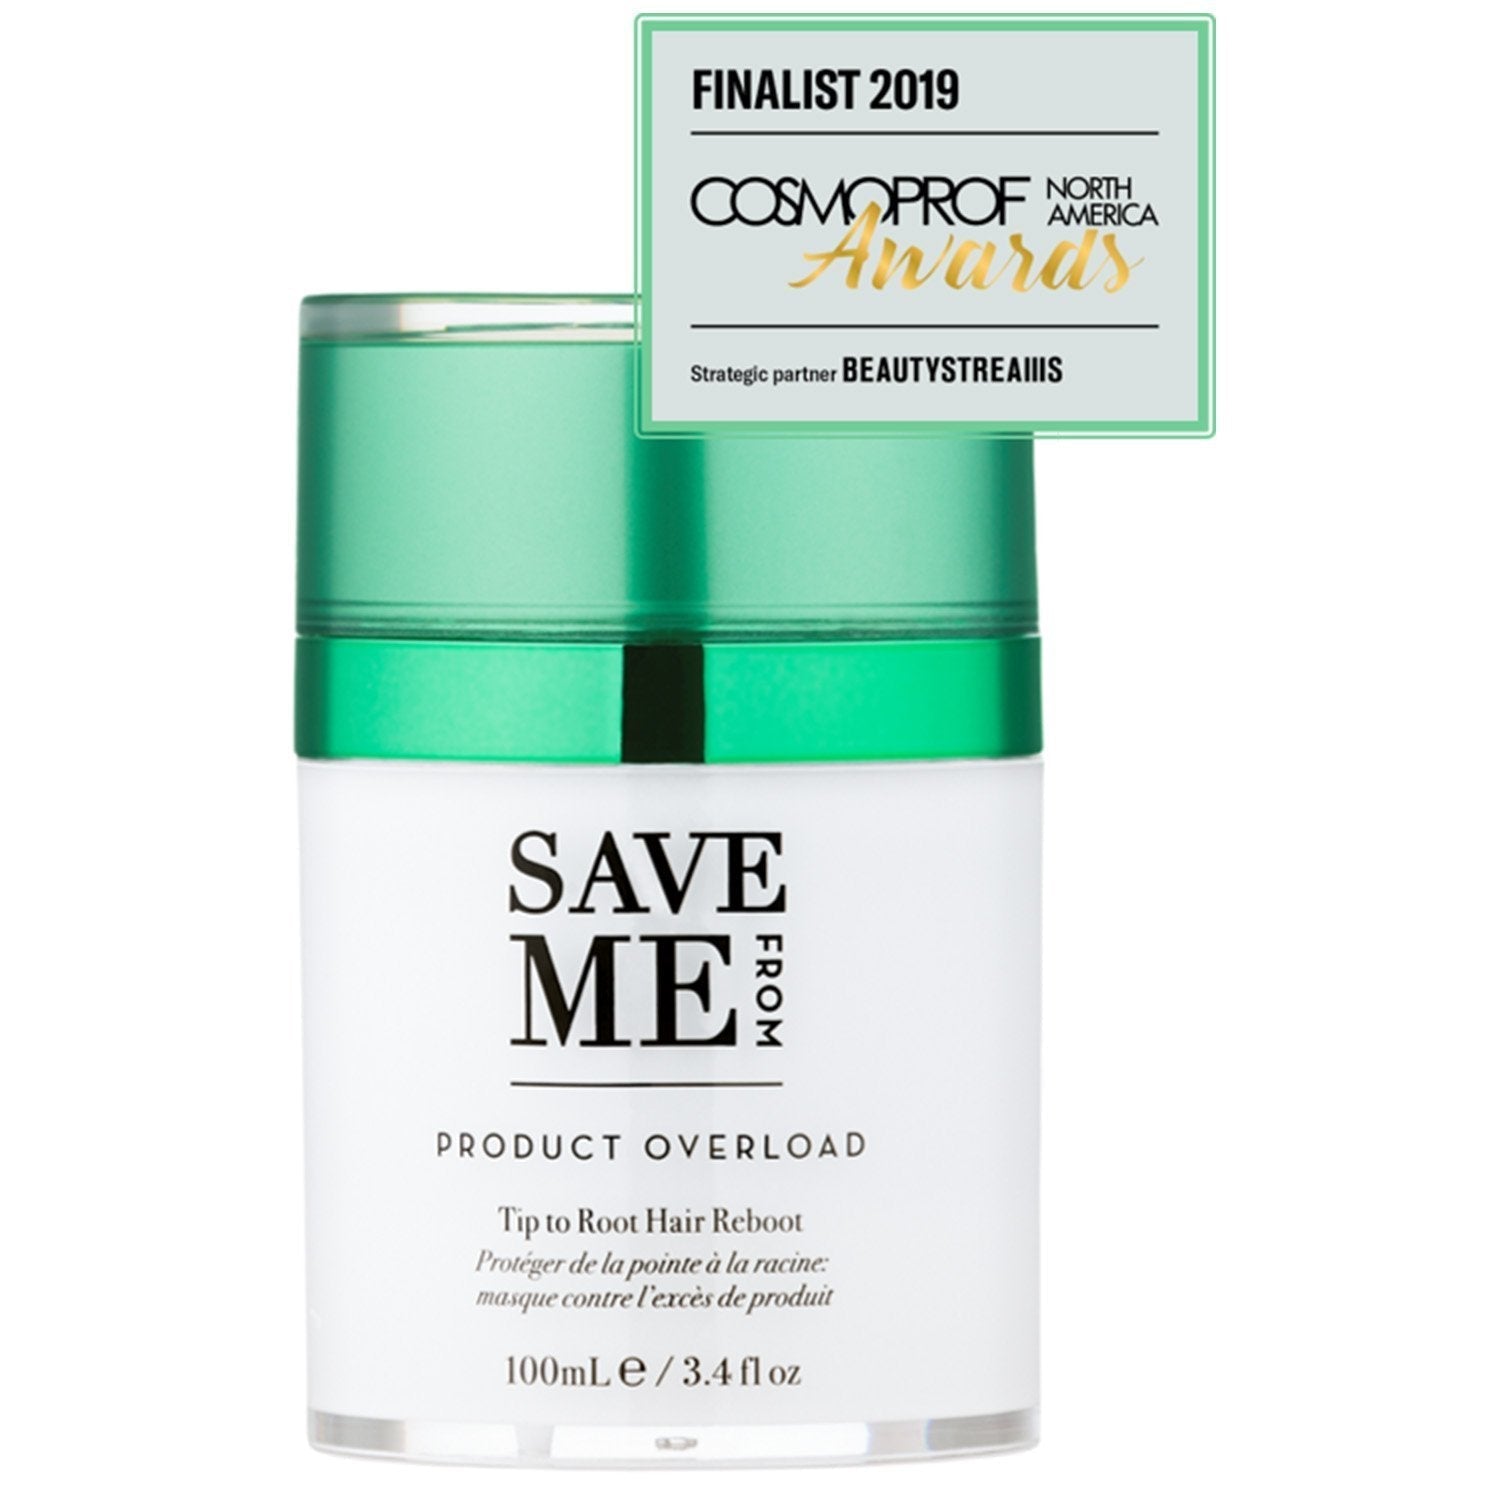 SAVE ME FROM Product Overload Hair Detox🫧 a Best Hair Product finalist at Cosmoprof! - SAVE ME FROM